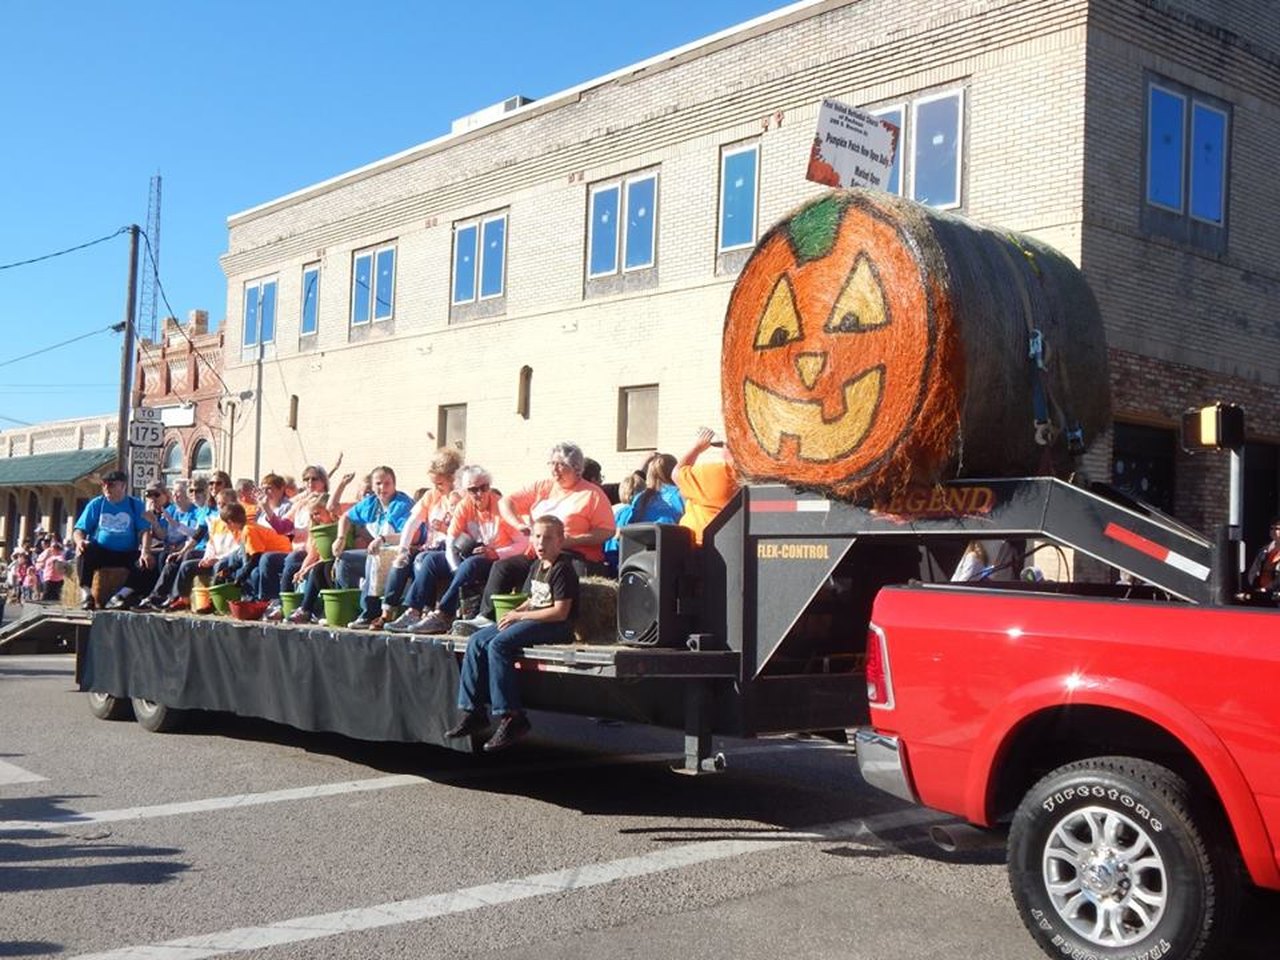 11 Of The Best Small Town Fall Festivals In Texas